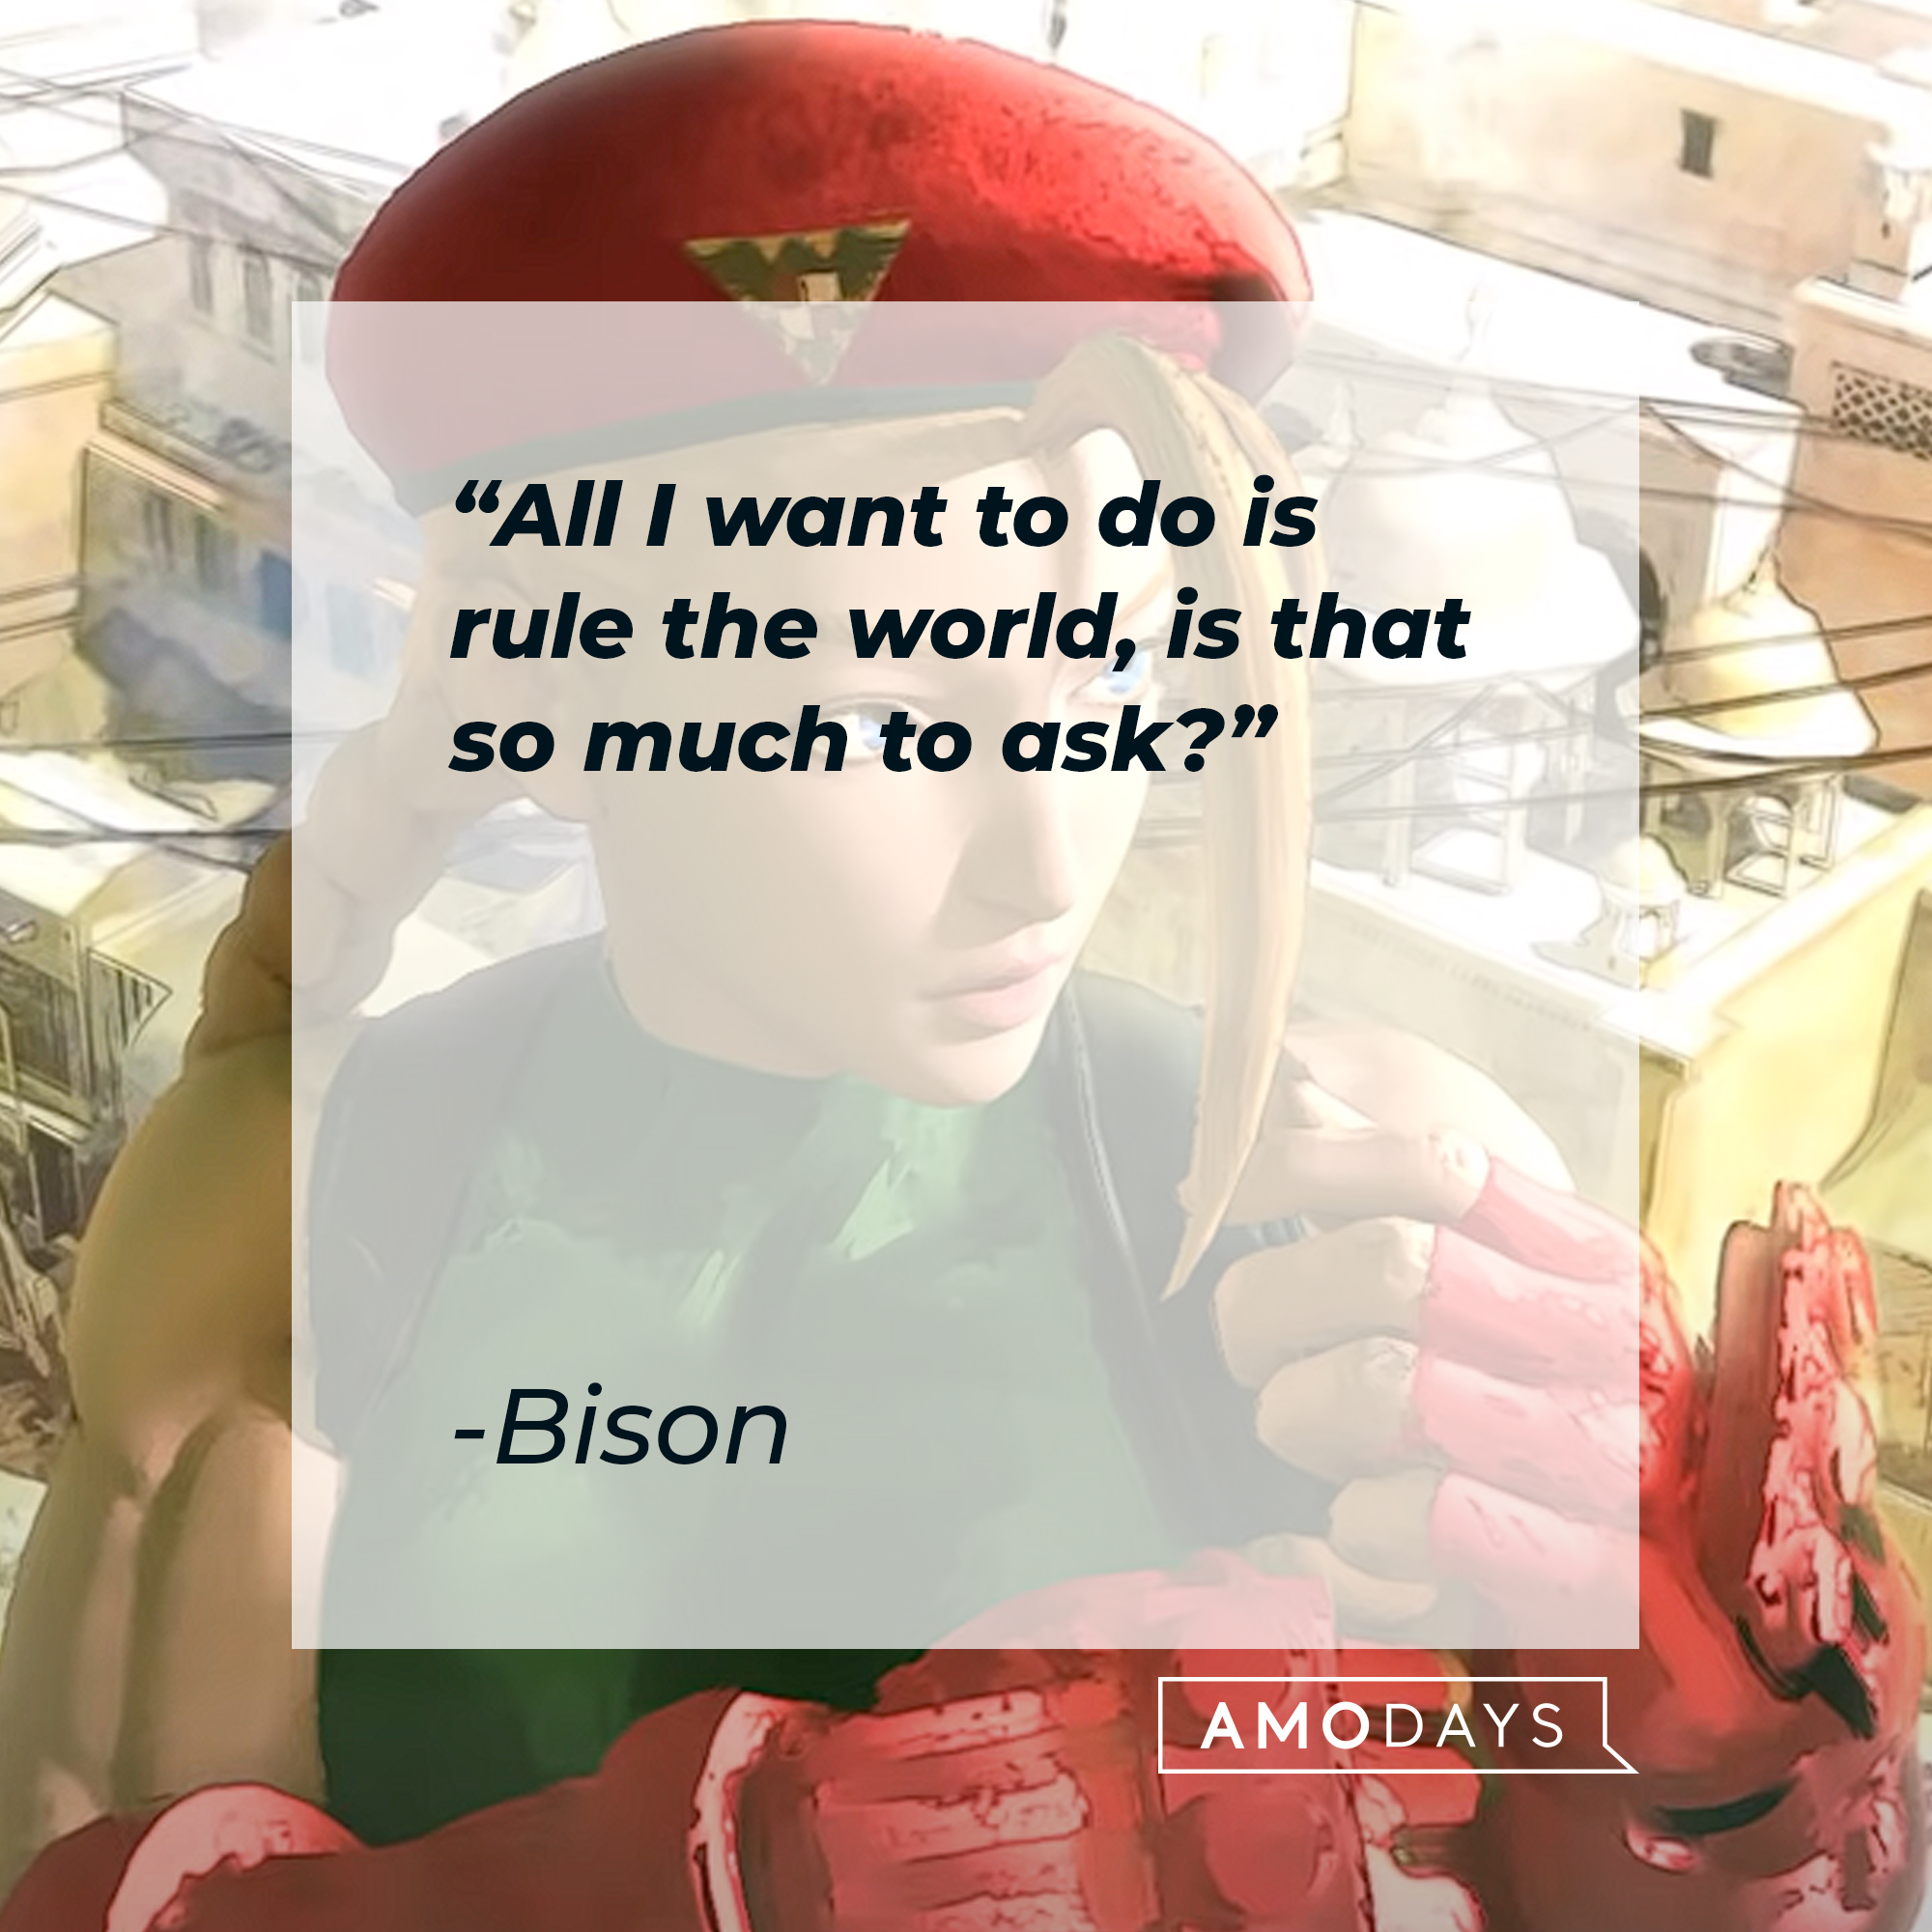 Bison's quote: "All I want to do is rule the world, is that so much to ask?" | Source: youtube.com/PlayStation